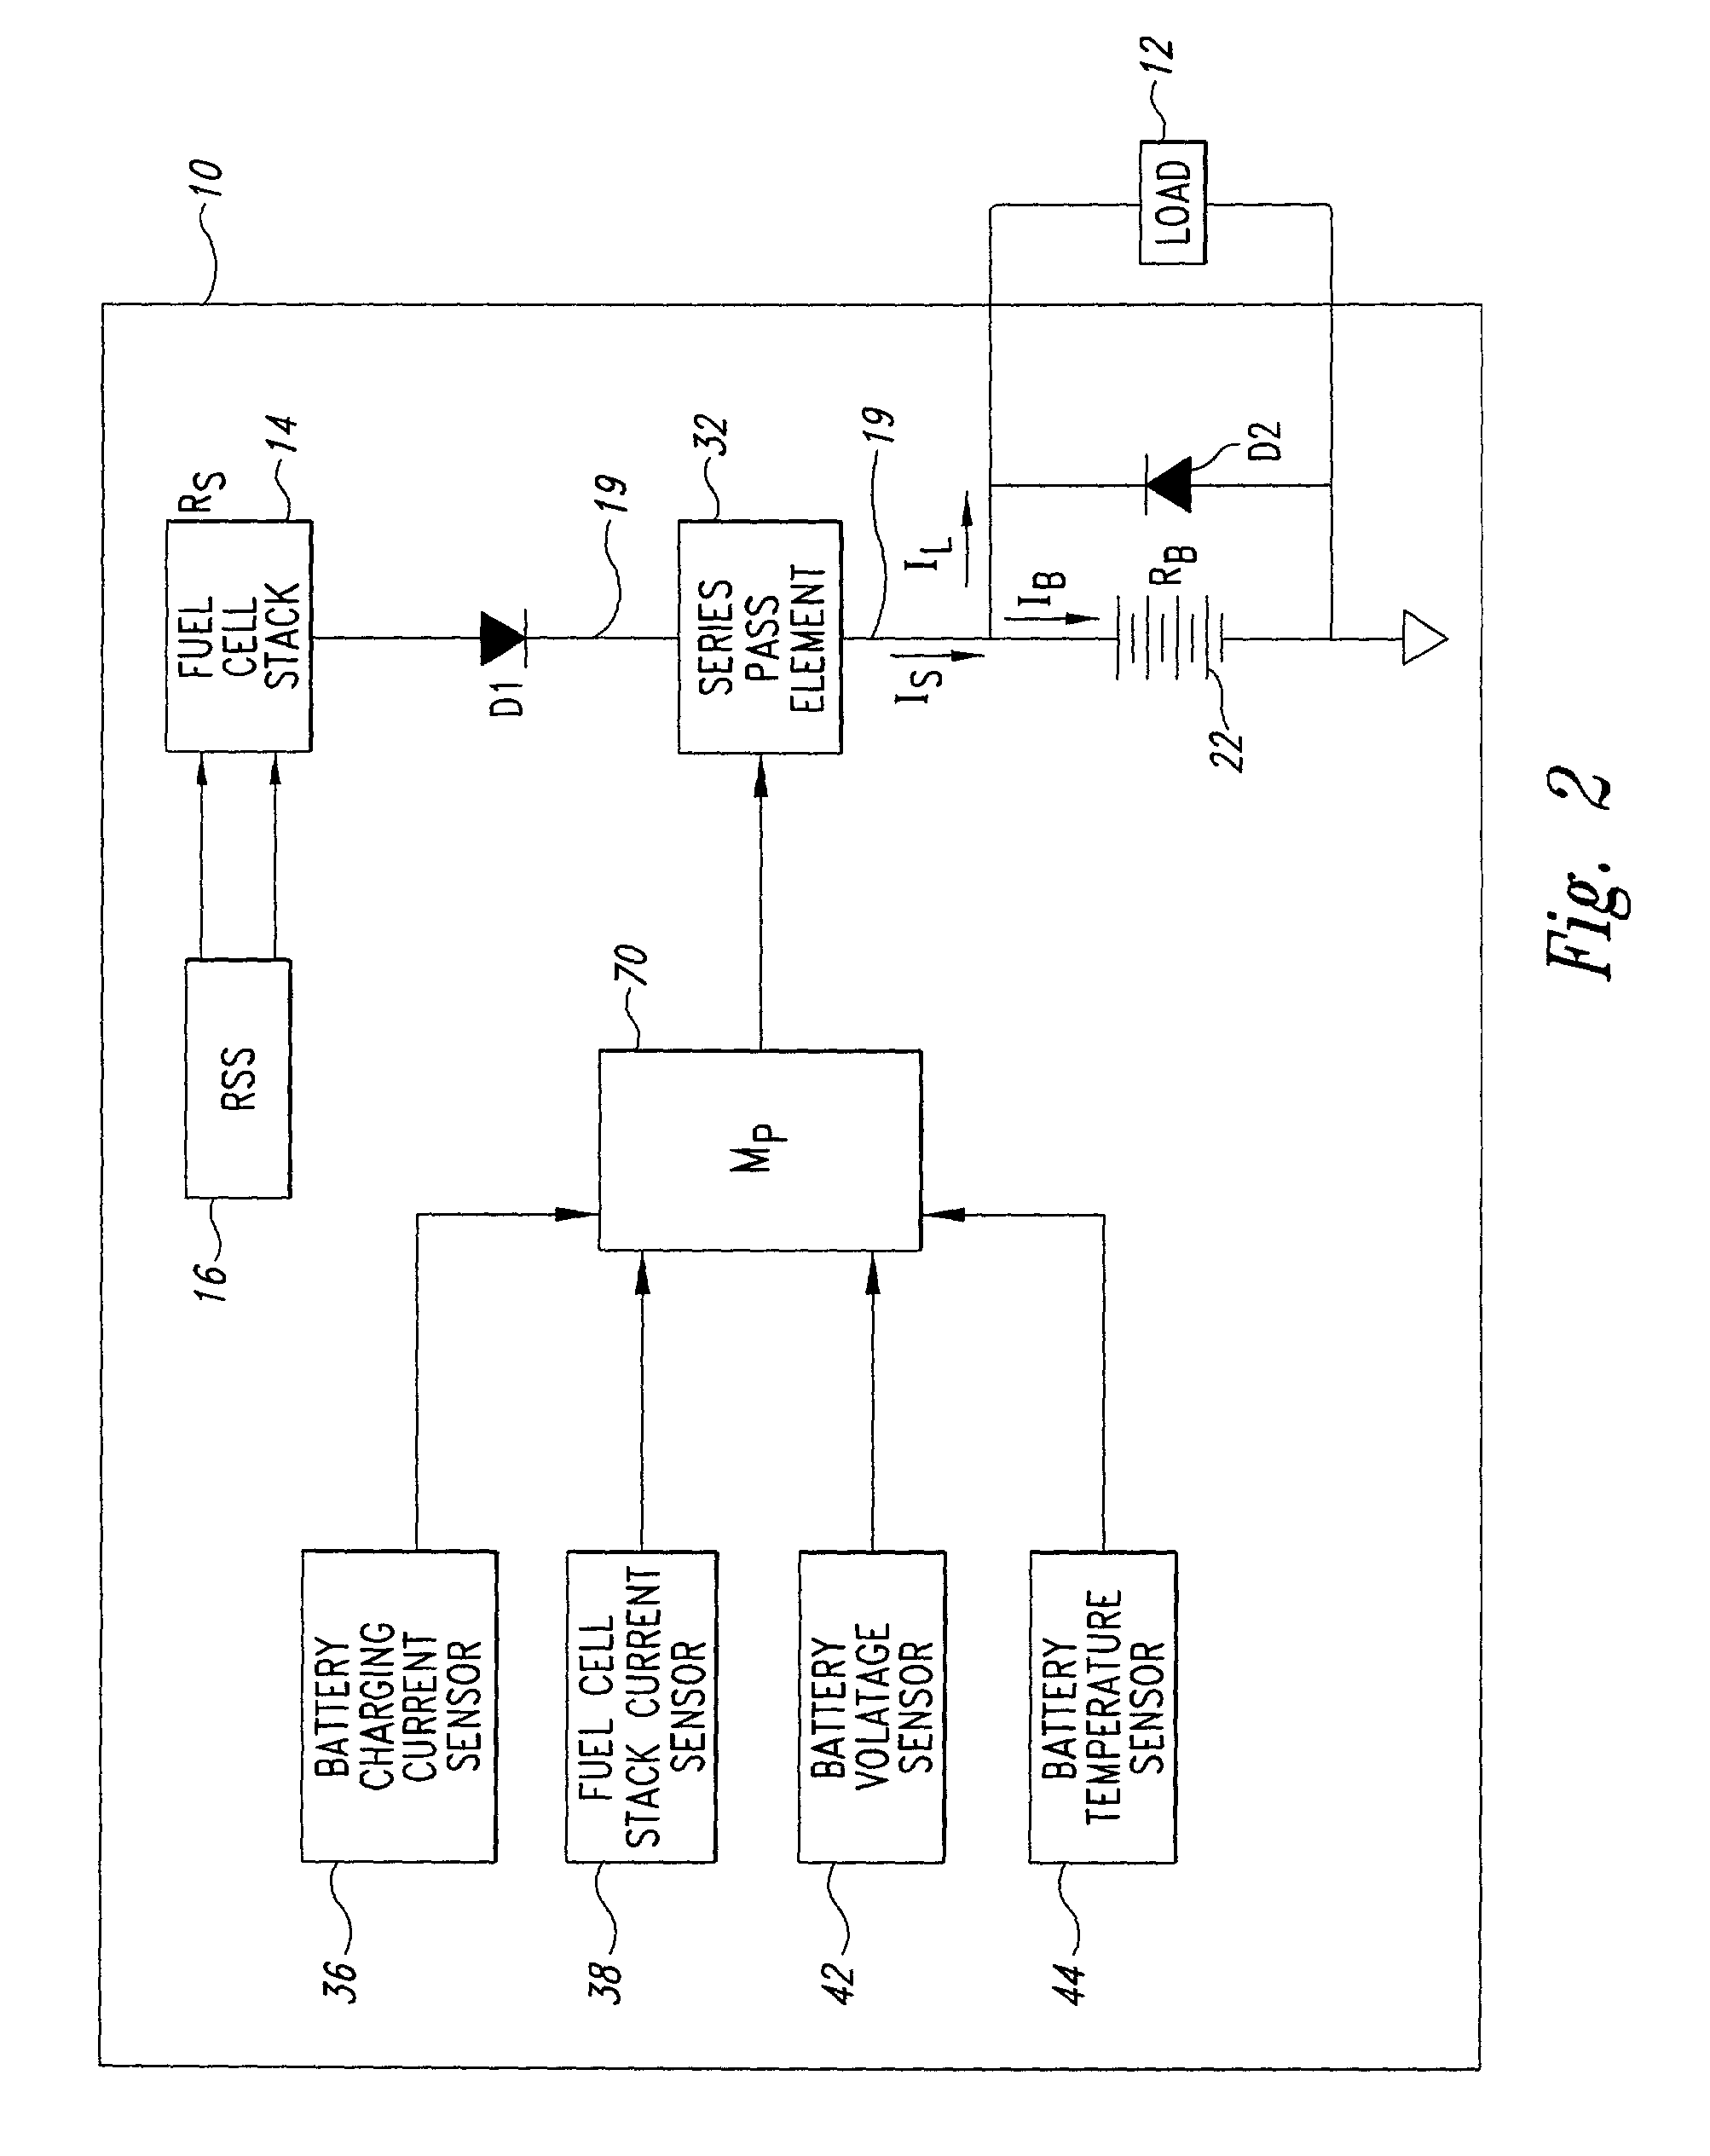 Method and apparatus for multiple mode control of voltage from a fuel cell system